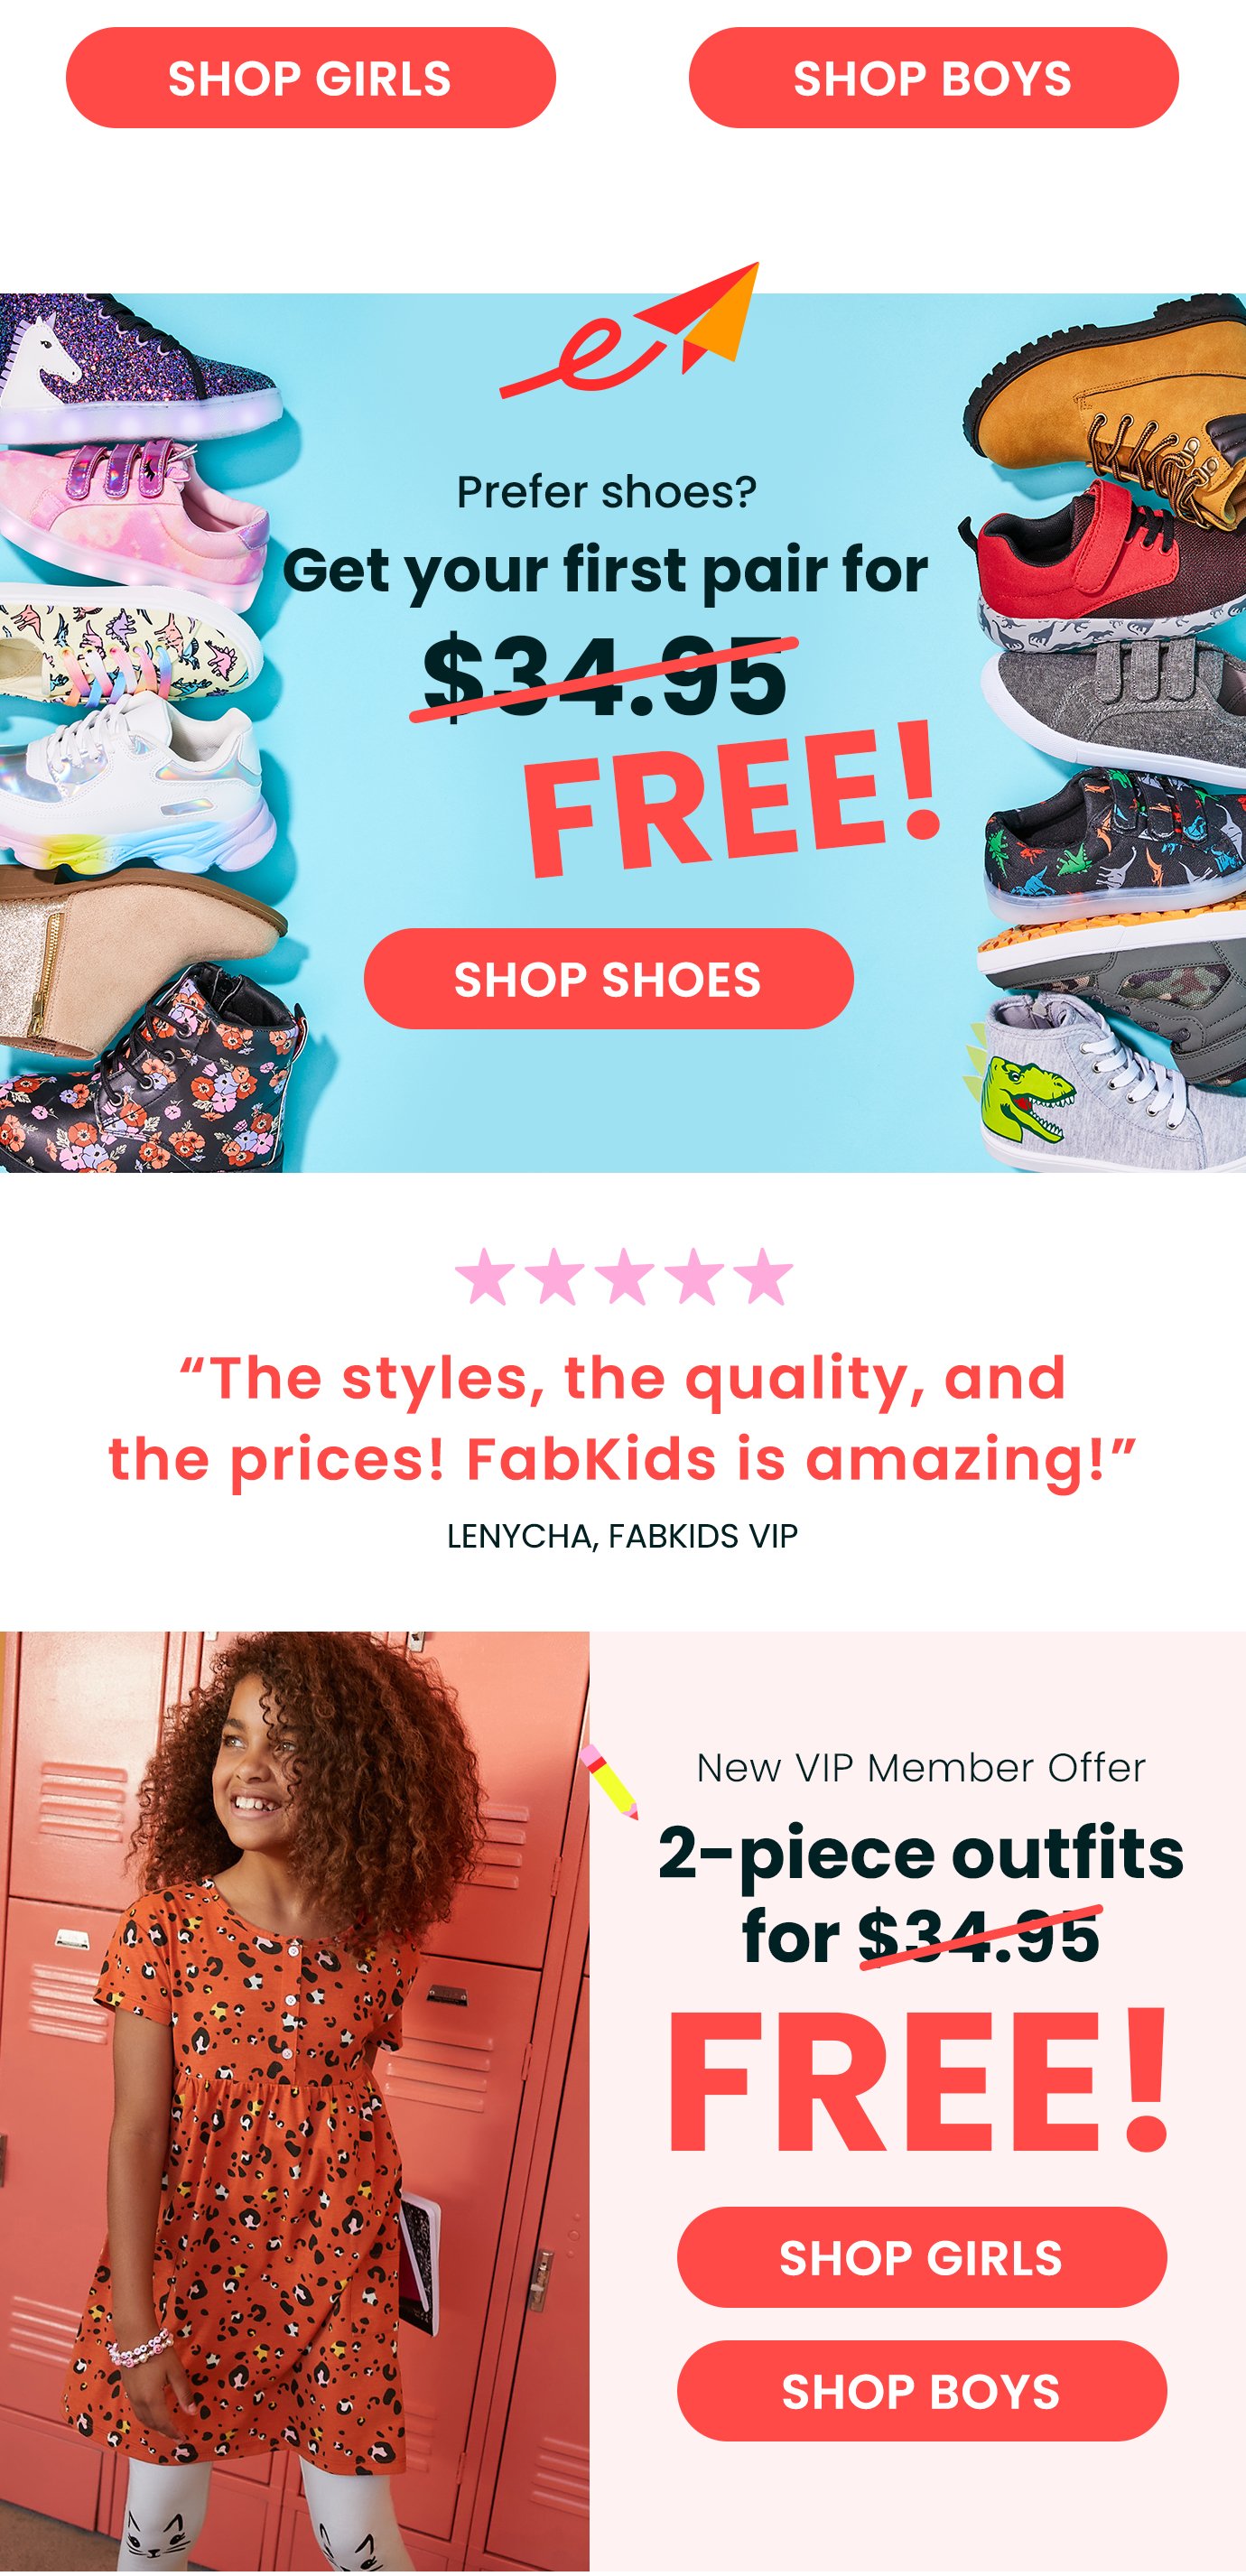 Fabletics, This Is Confirmed! Your FREE Gift from FabKids - Fabletics